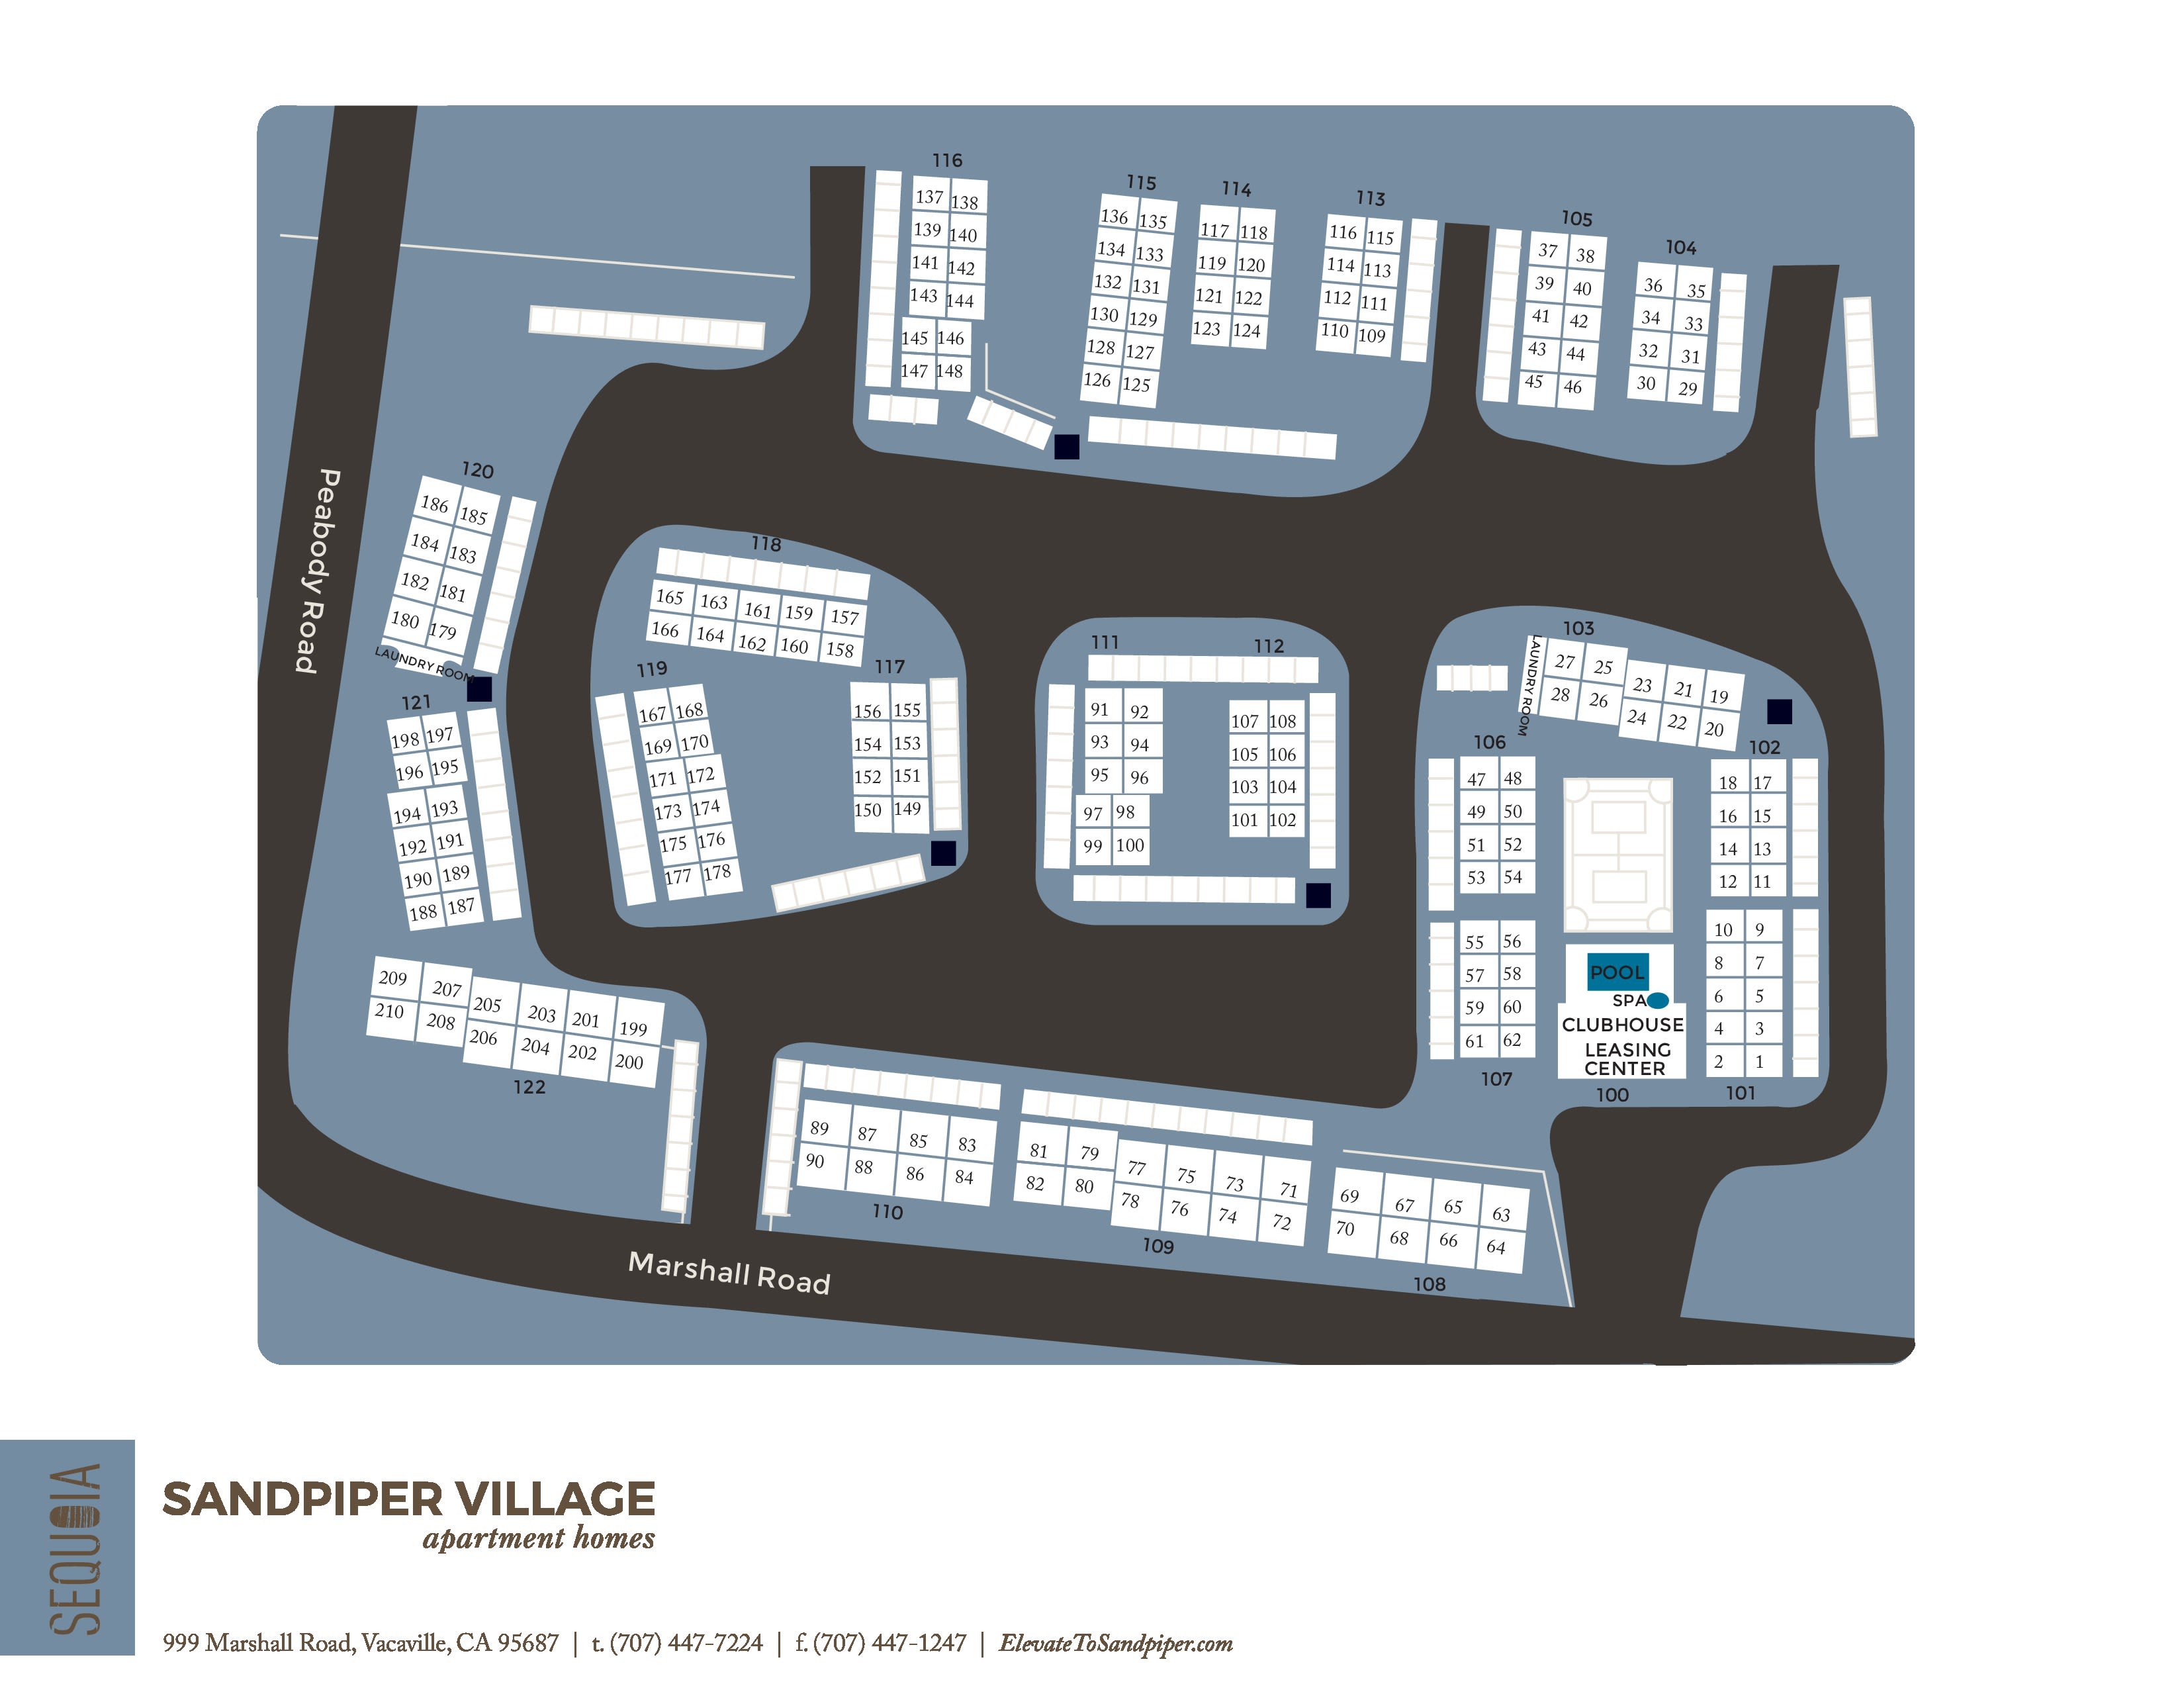 Community site map for Sandpiper Village Apartment Homes in Vacaville, California